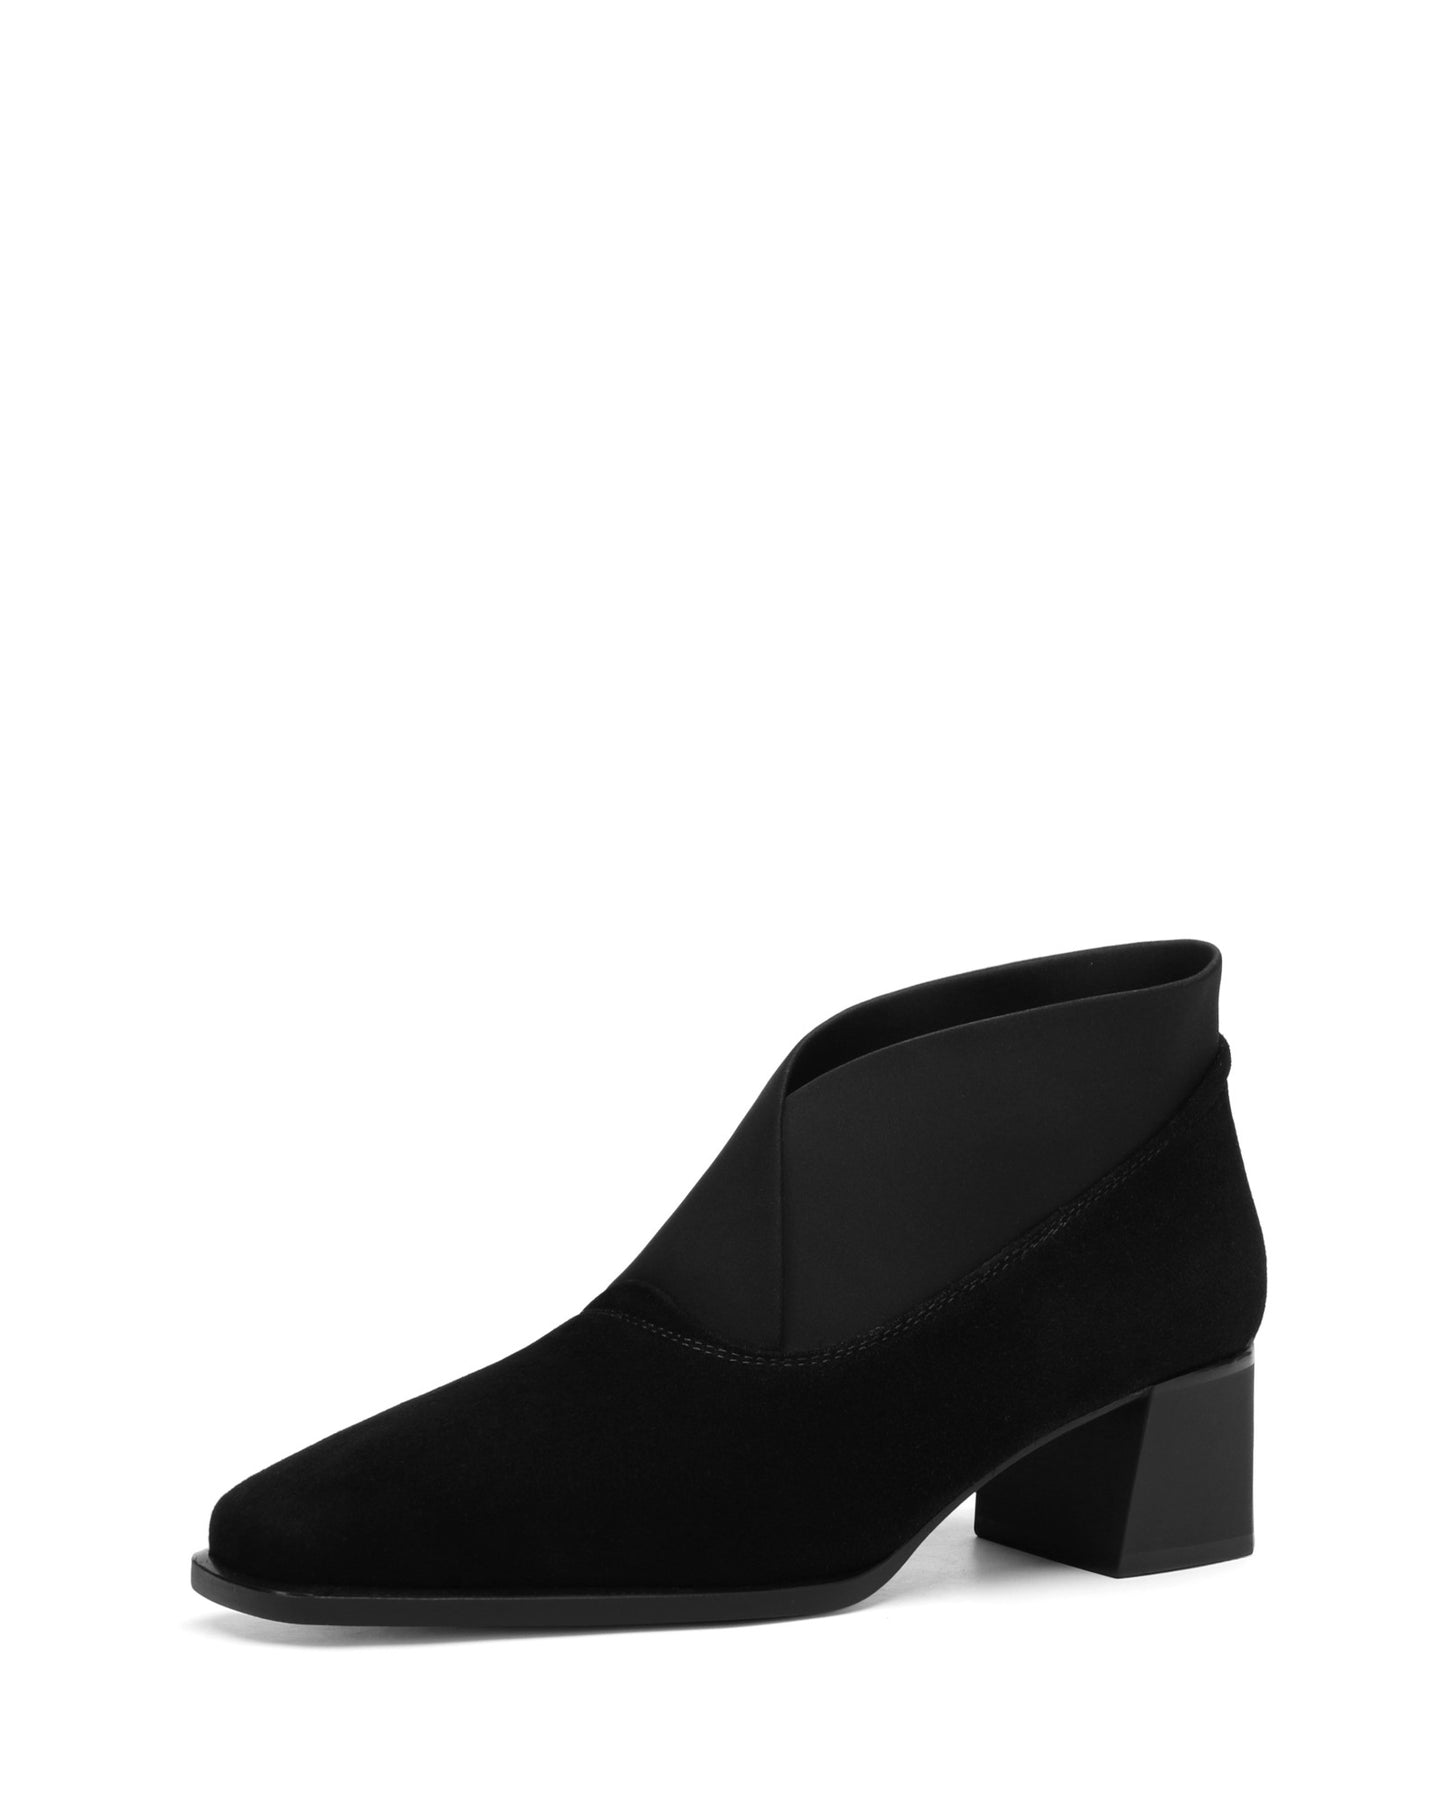 Riana-Black-Suede-Ankle-Boots